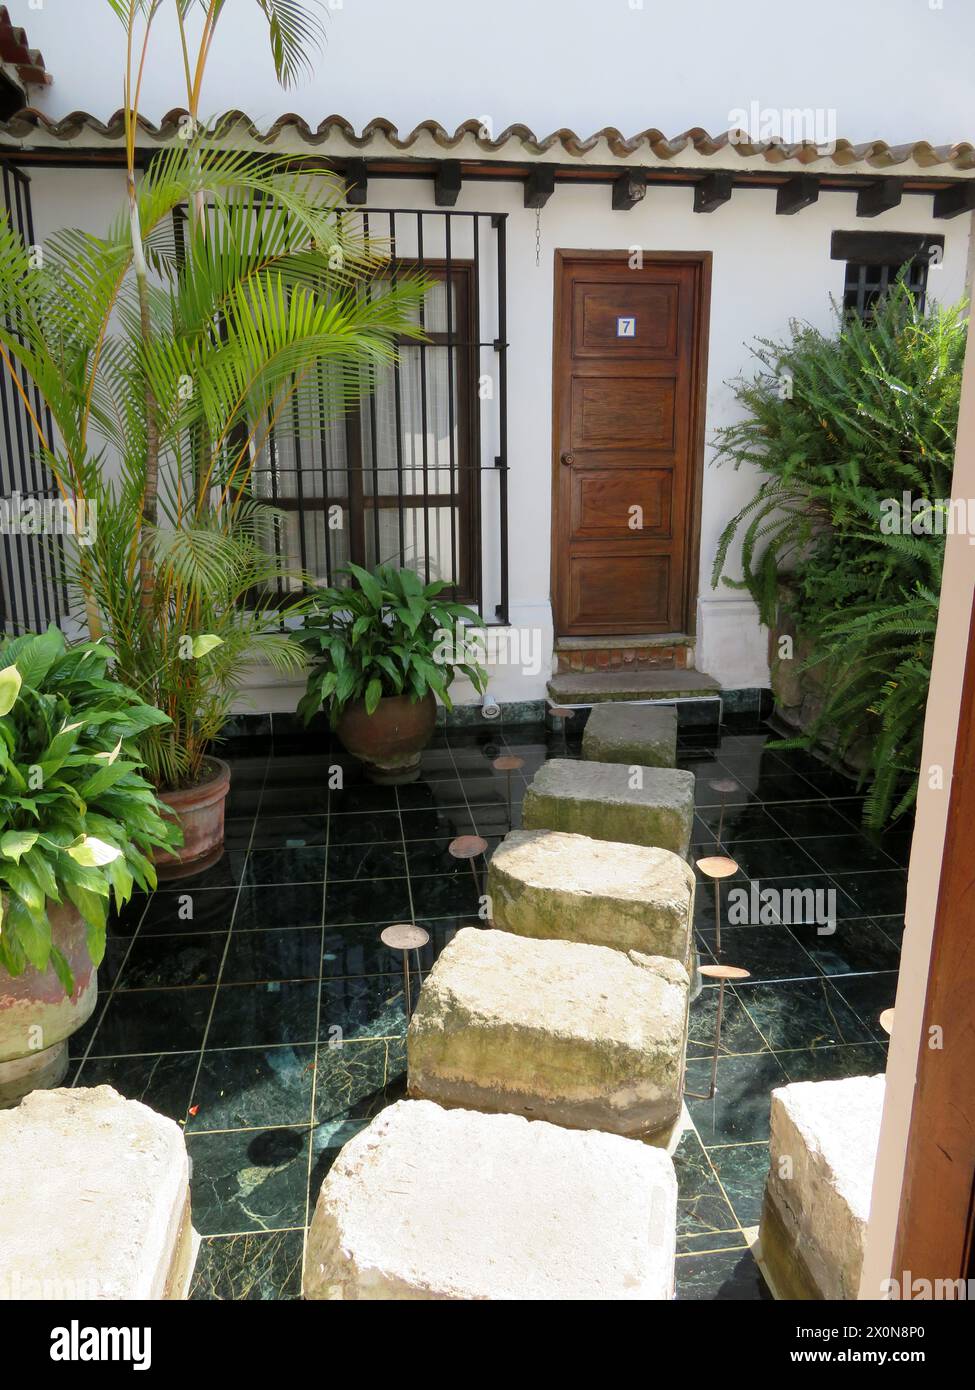 Casa Encantada .Boutique small, intimate hotel in Antigua.Calle Poniente. Guatemala, Central America. Stylish stepping stones to some of the bedrooms. Stock Photo